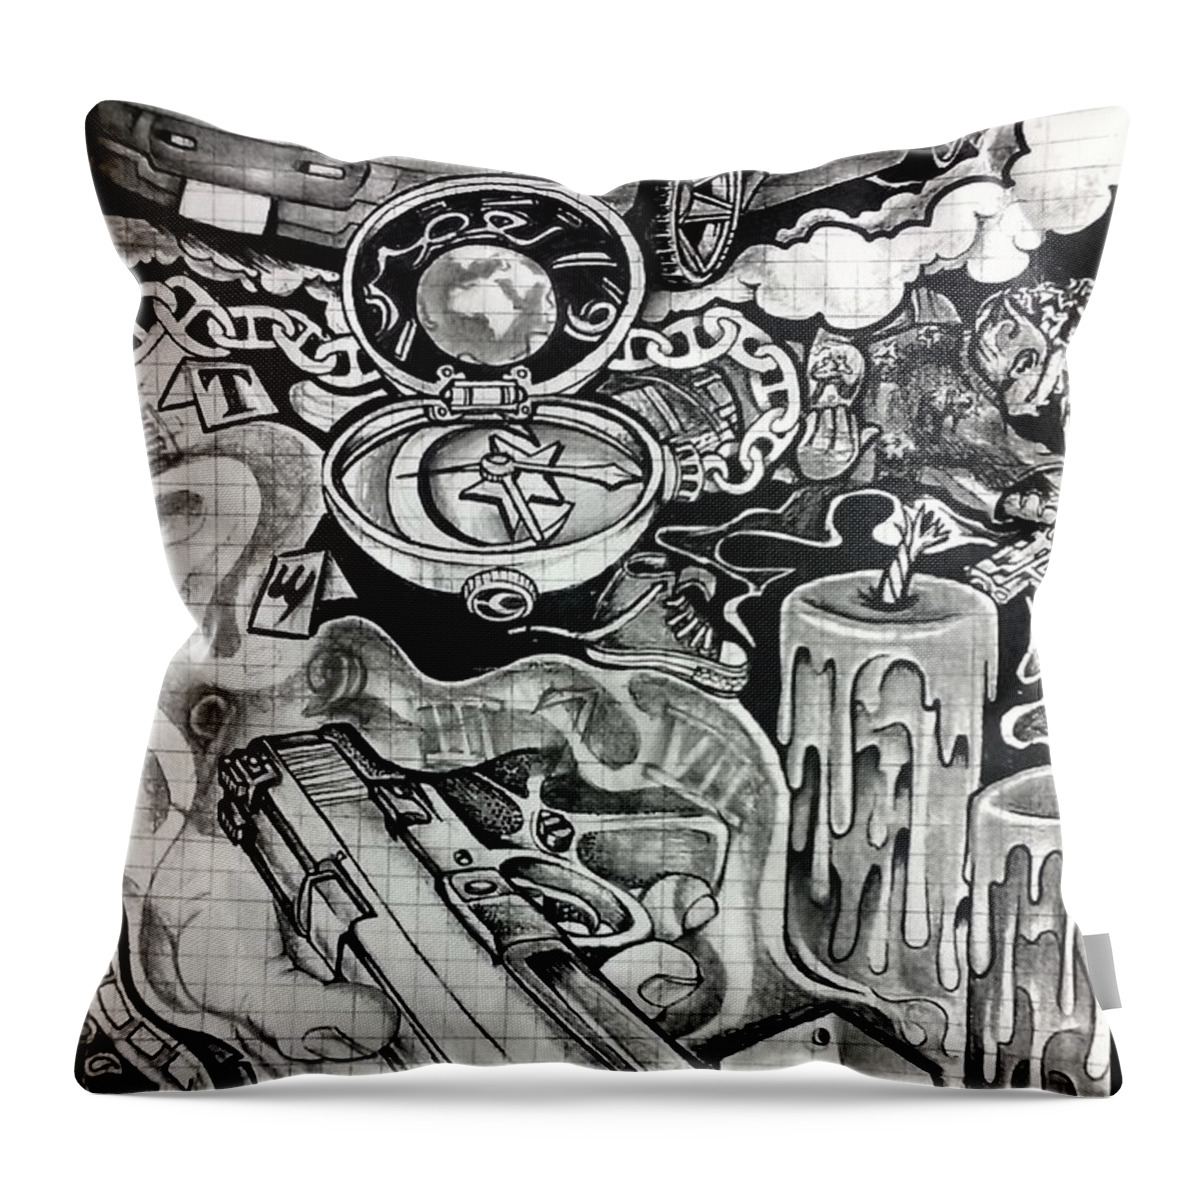 Black Art Throw Pillow featuring the drawing Untitled #7 by Arnold Citizen aka Musafir